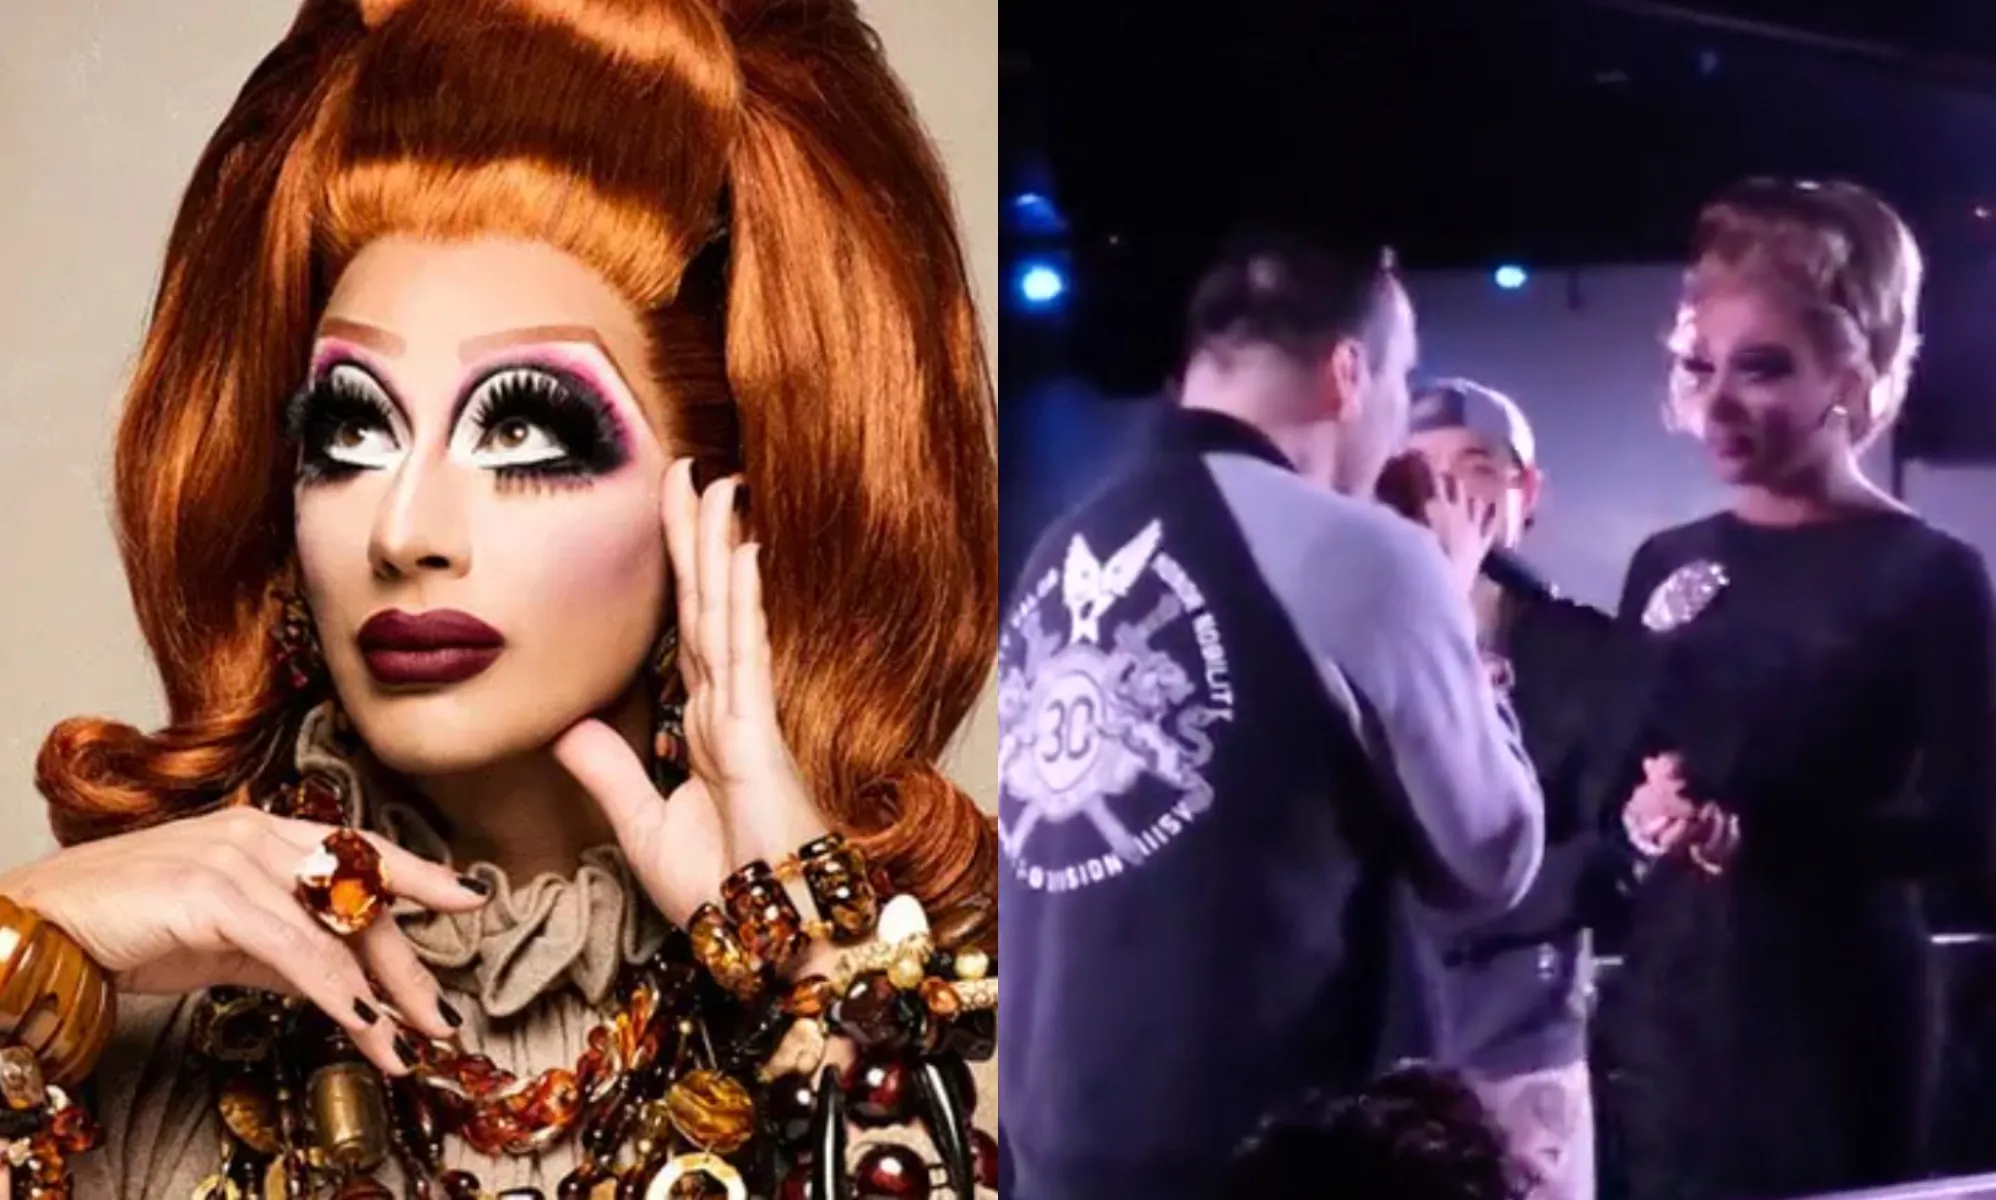 Bianca Del Rio reads heckler to filth in resurfaced video